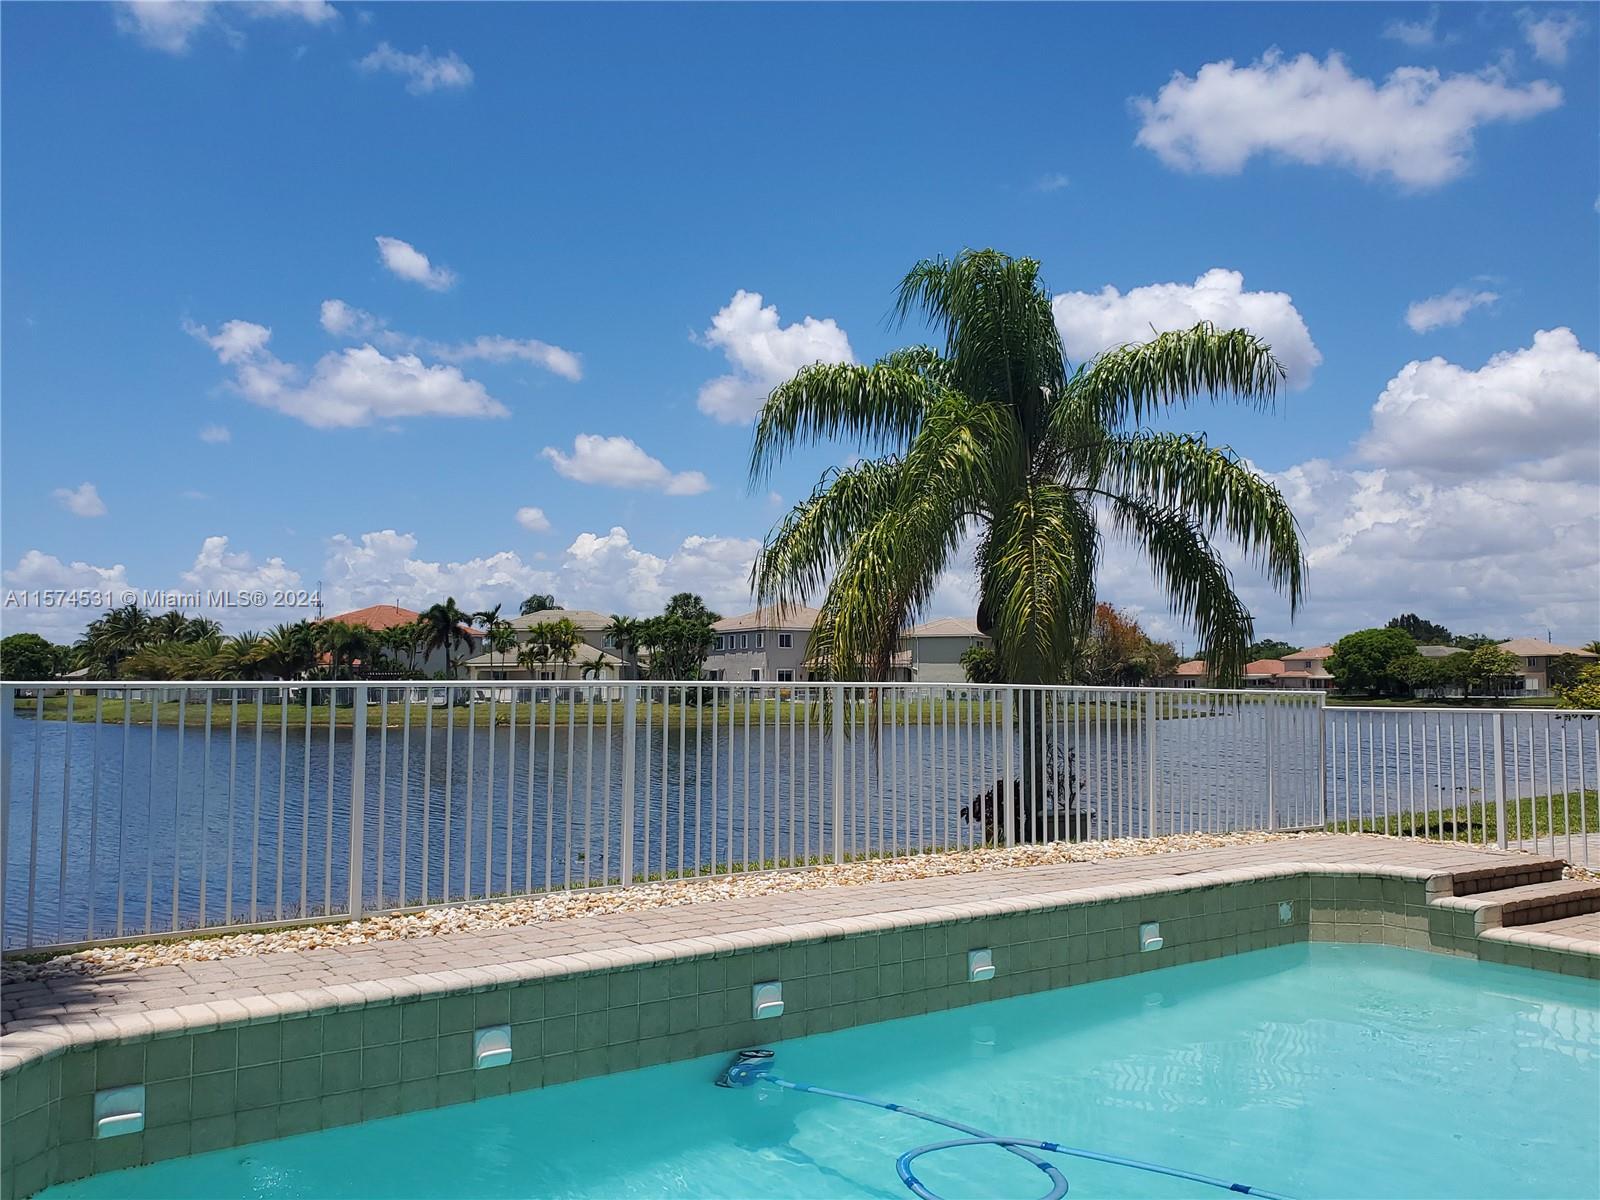 6145 Sw 192nd Ave, Pembroke Pines, Miami-Dade County, Florida - 5 Bedrooms  
4 Bathrooms - 